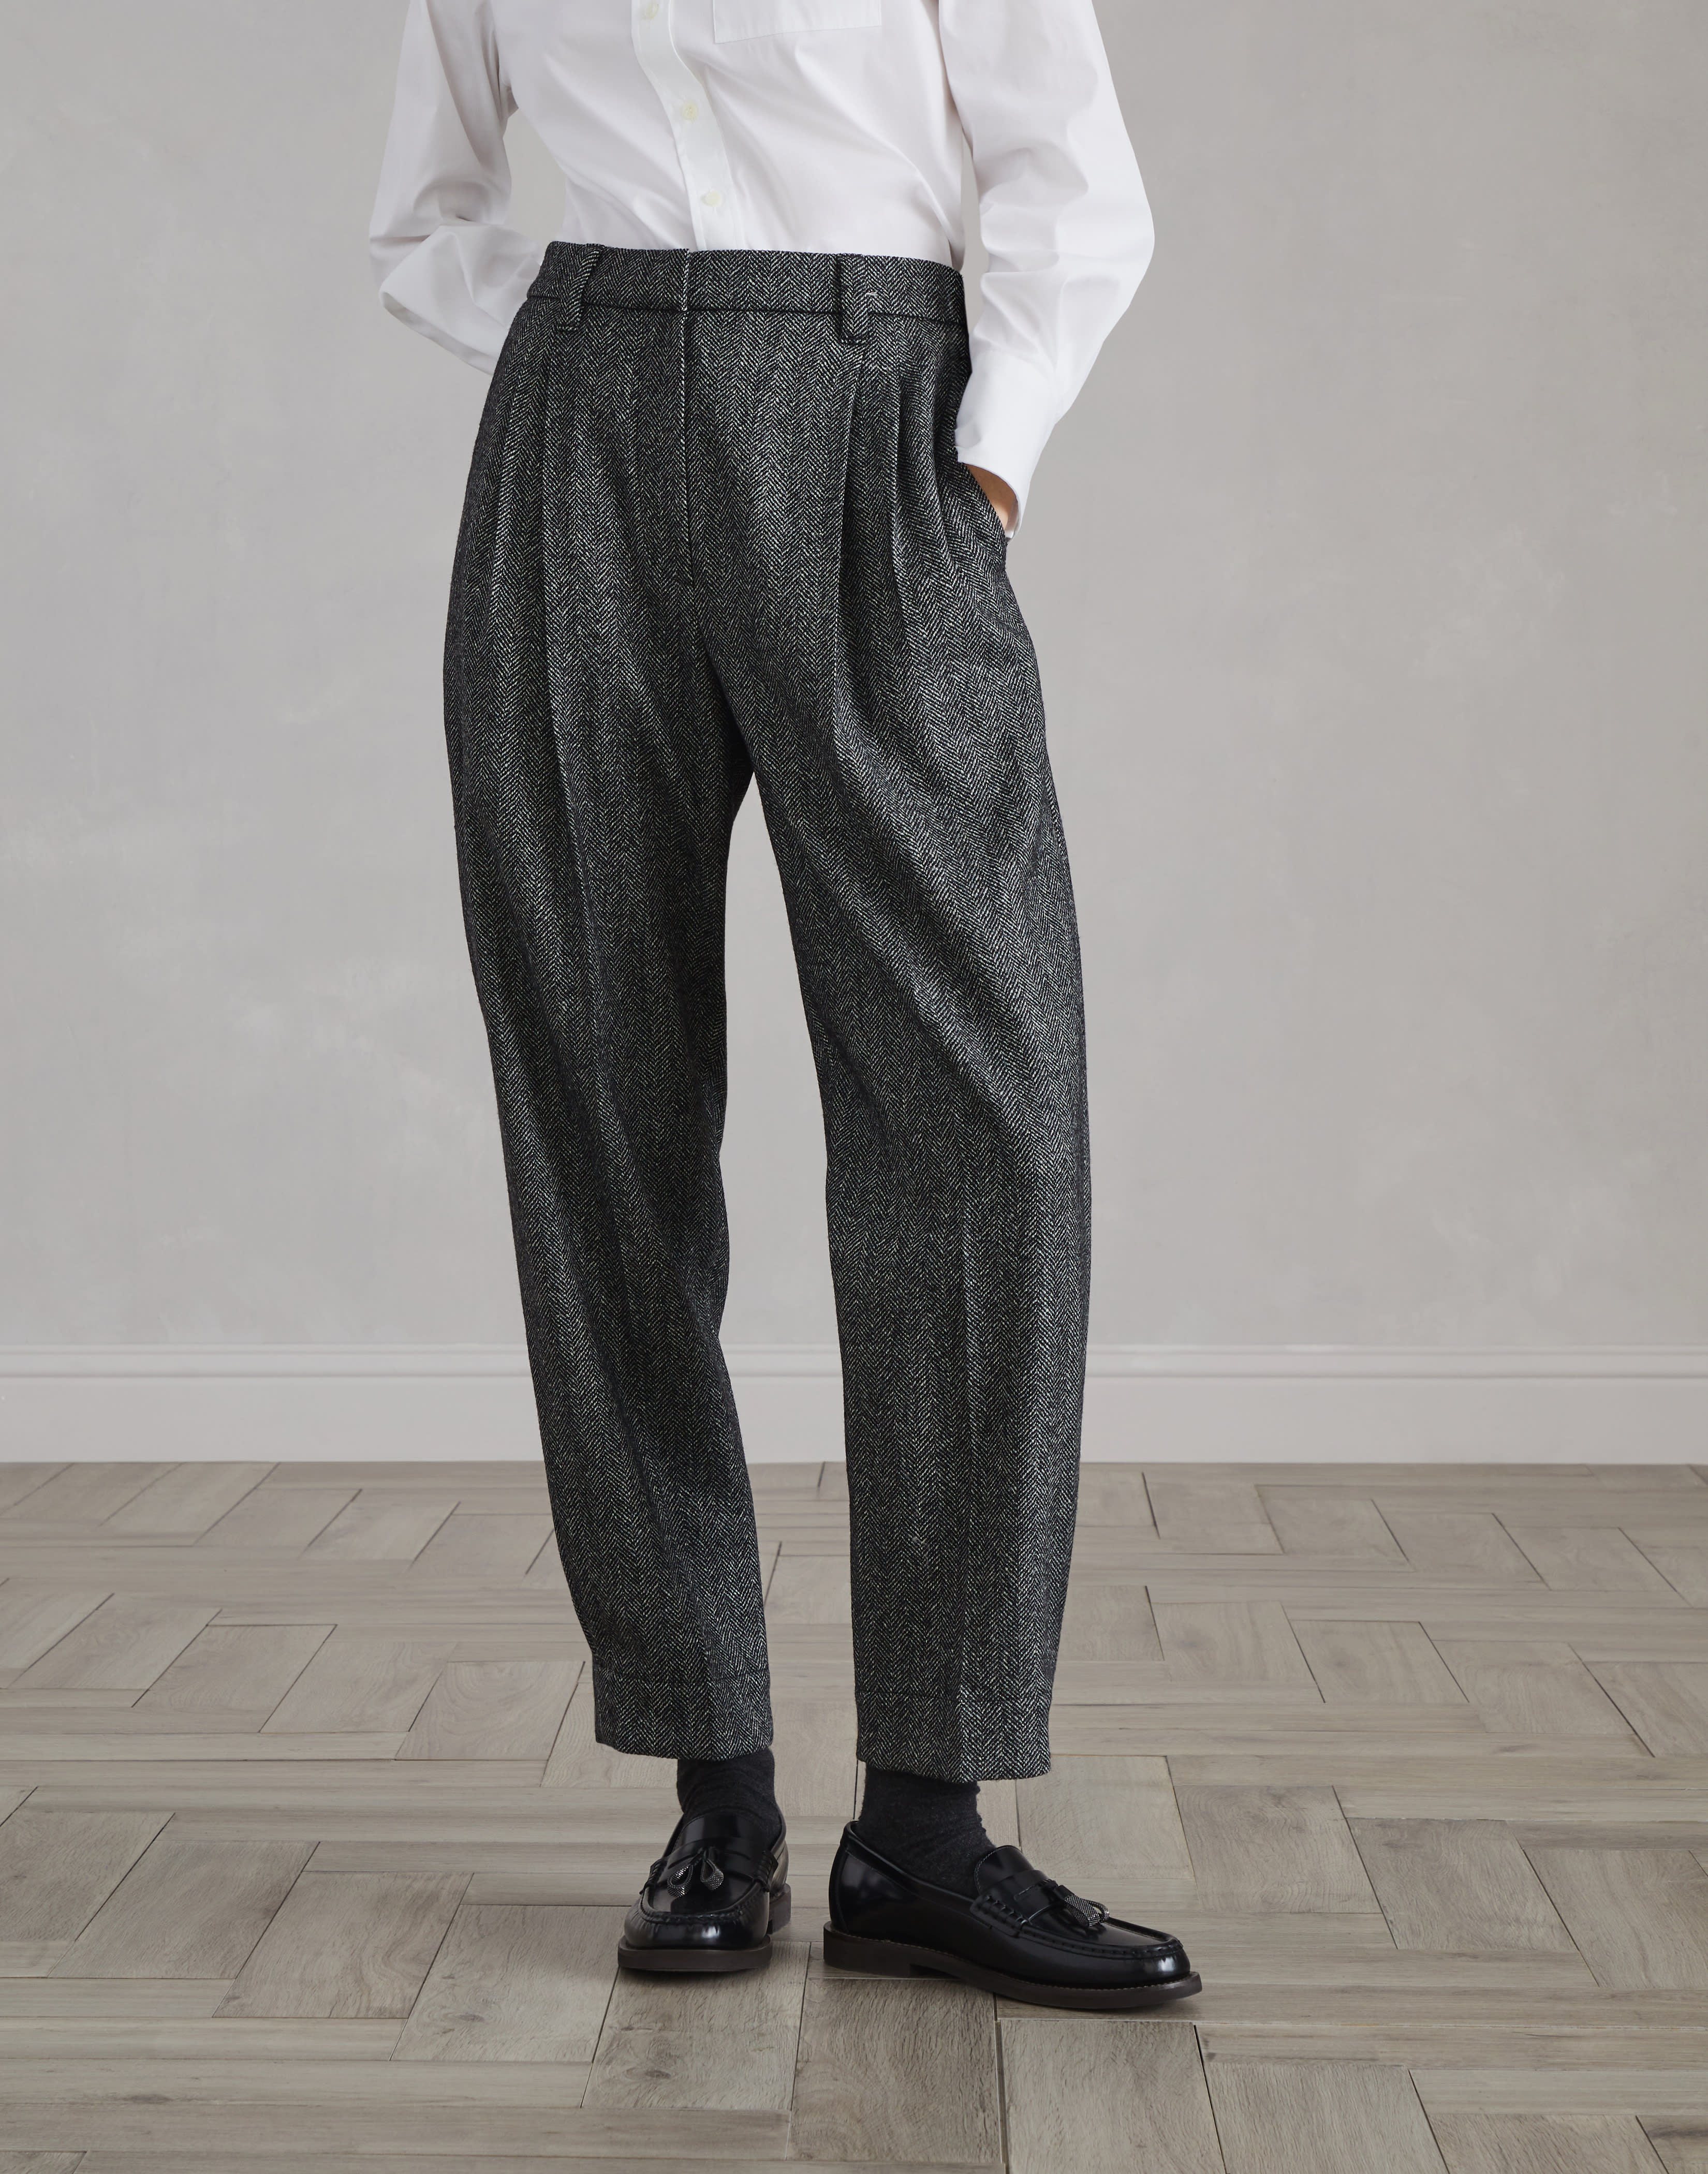 Baggy sartorial trousers